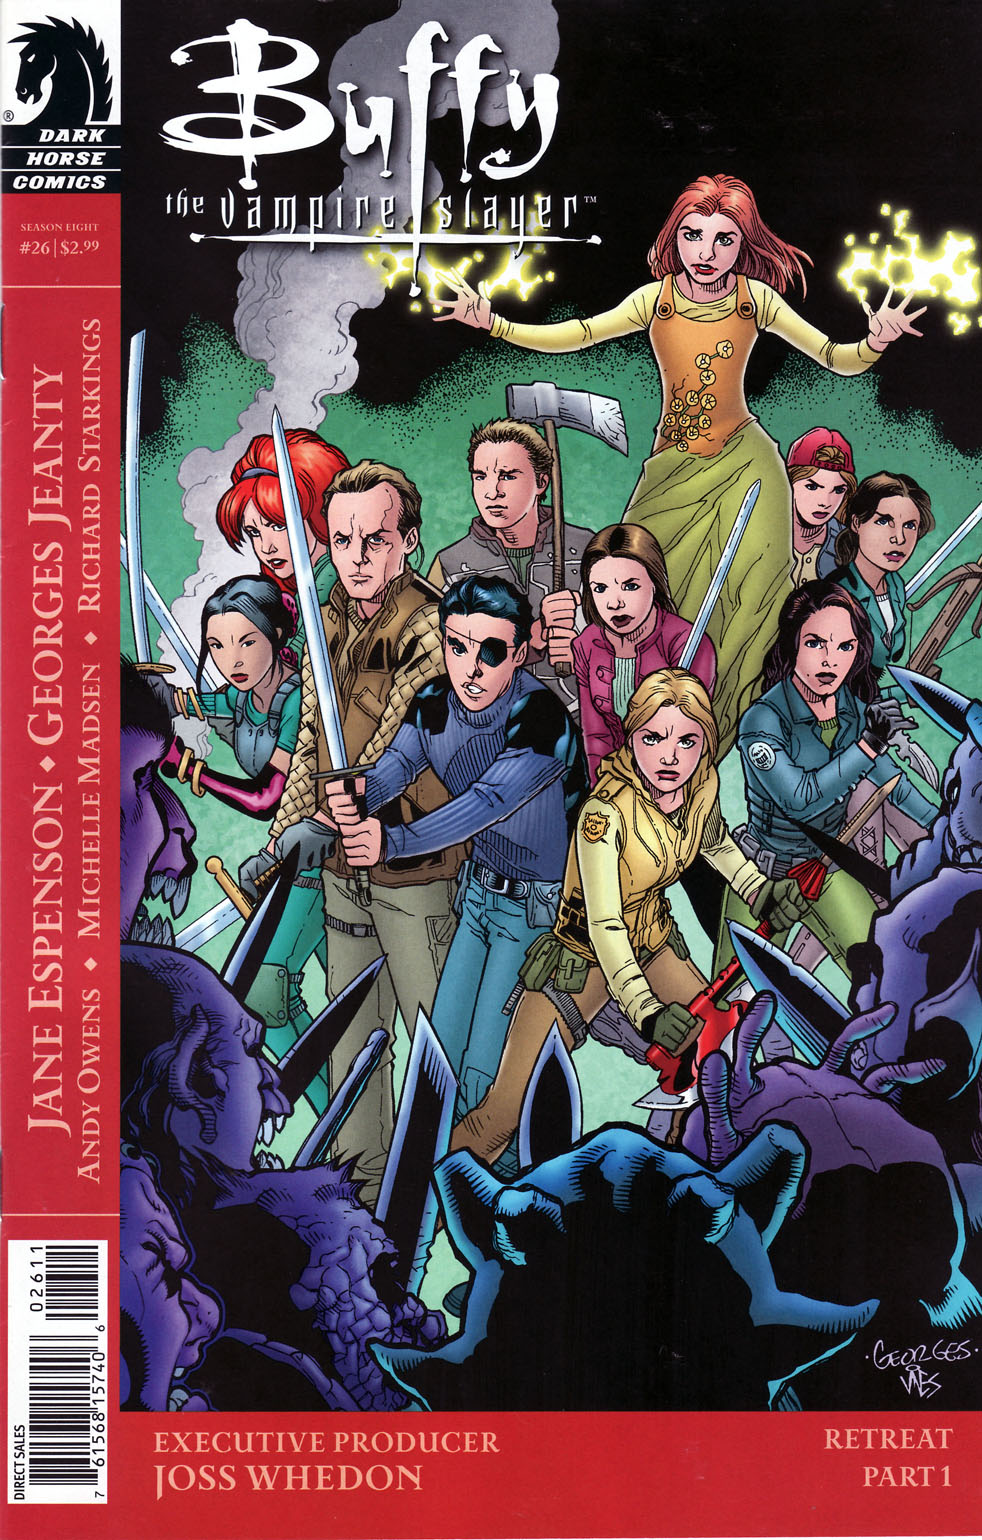 Buffy The Vampire Slayer Season Eight Issue 26 | Read Buffy The Vampire  Slayer Season Eight Issue 26 comic online in high quality. Read Full Comic  online for free - Read comics